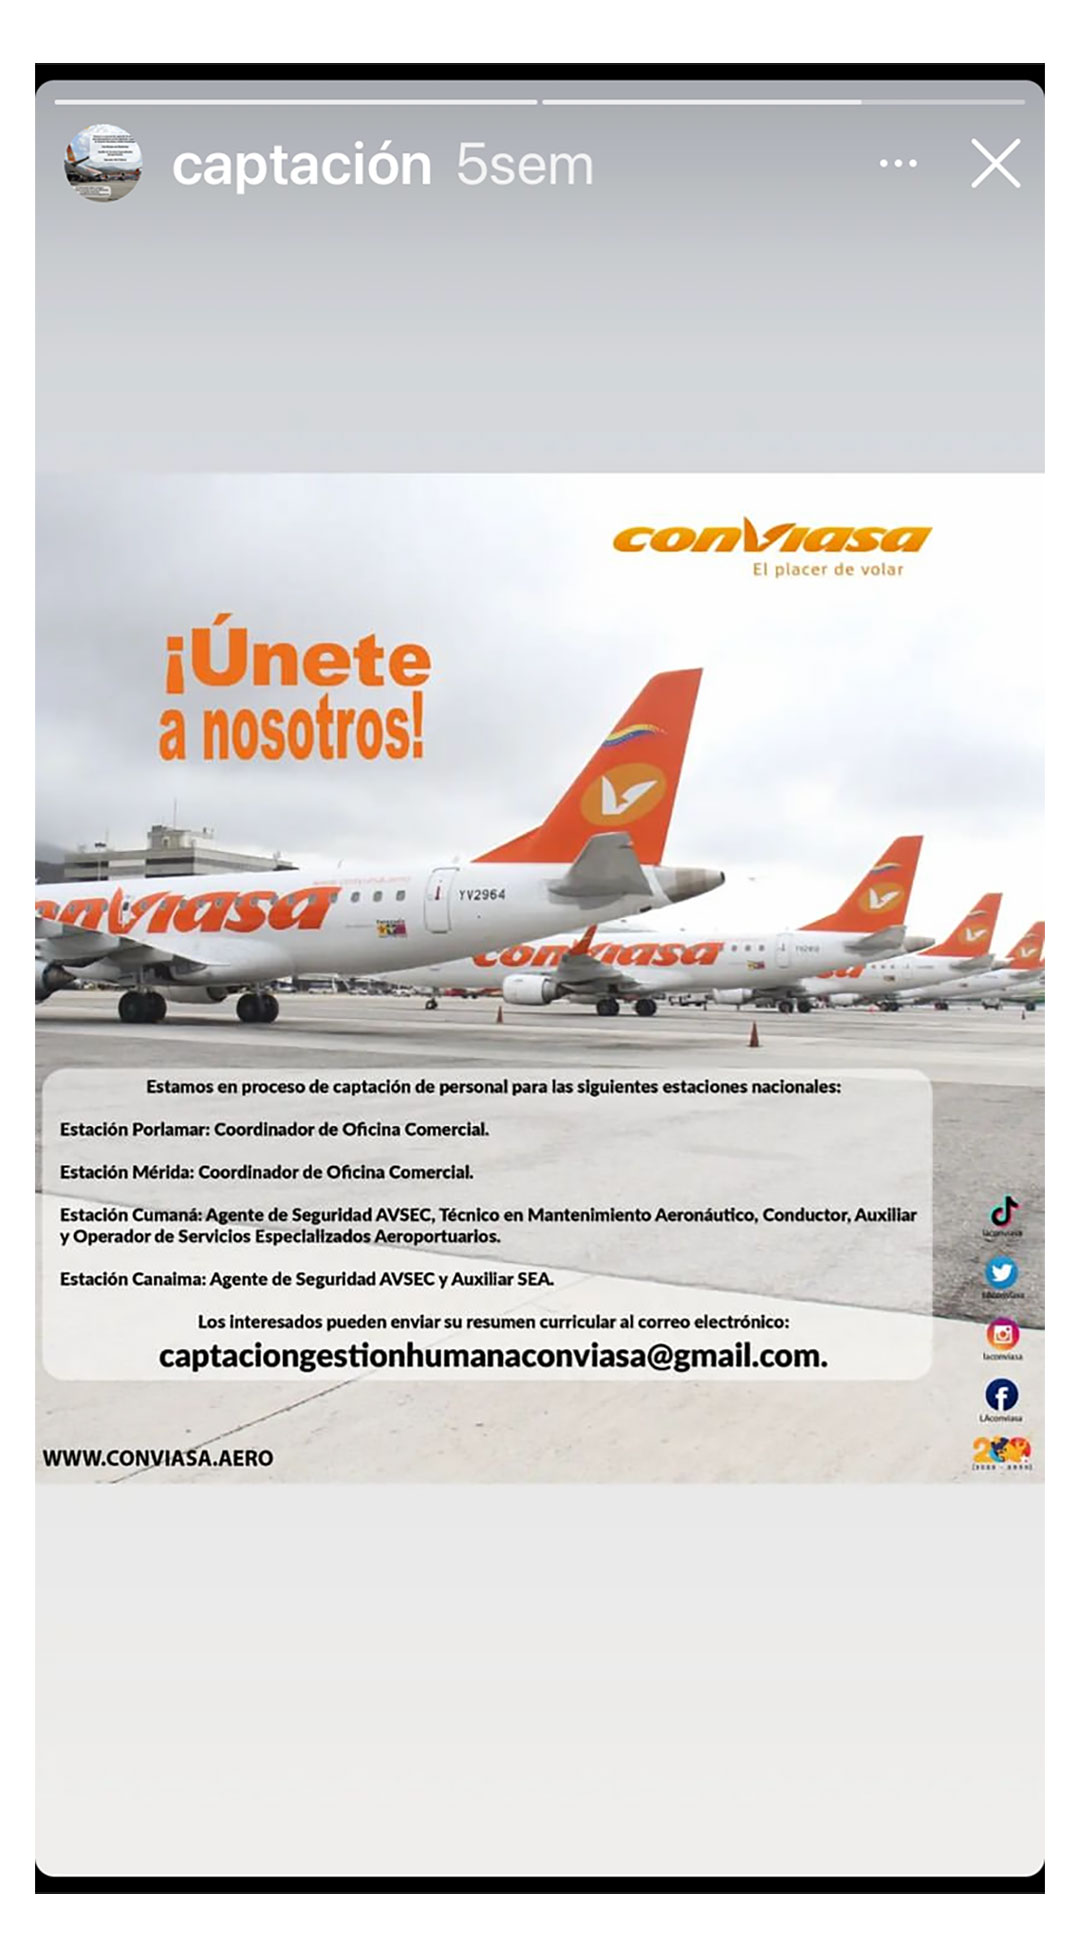 Advertising from Conviasa a month and a half ago on their networks